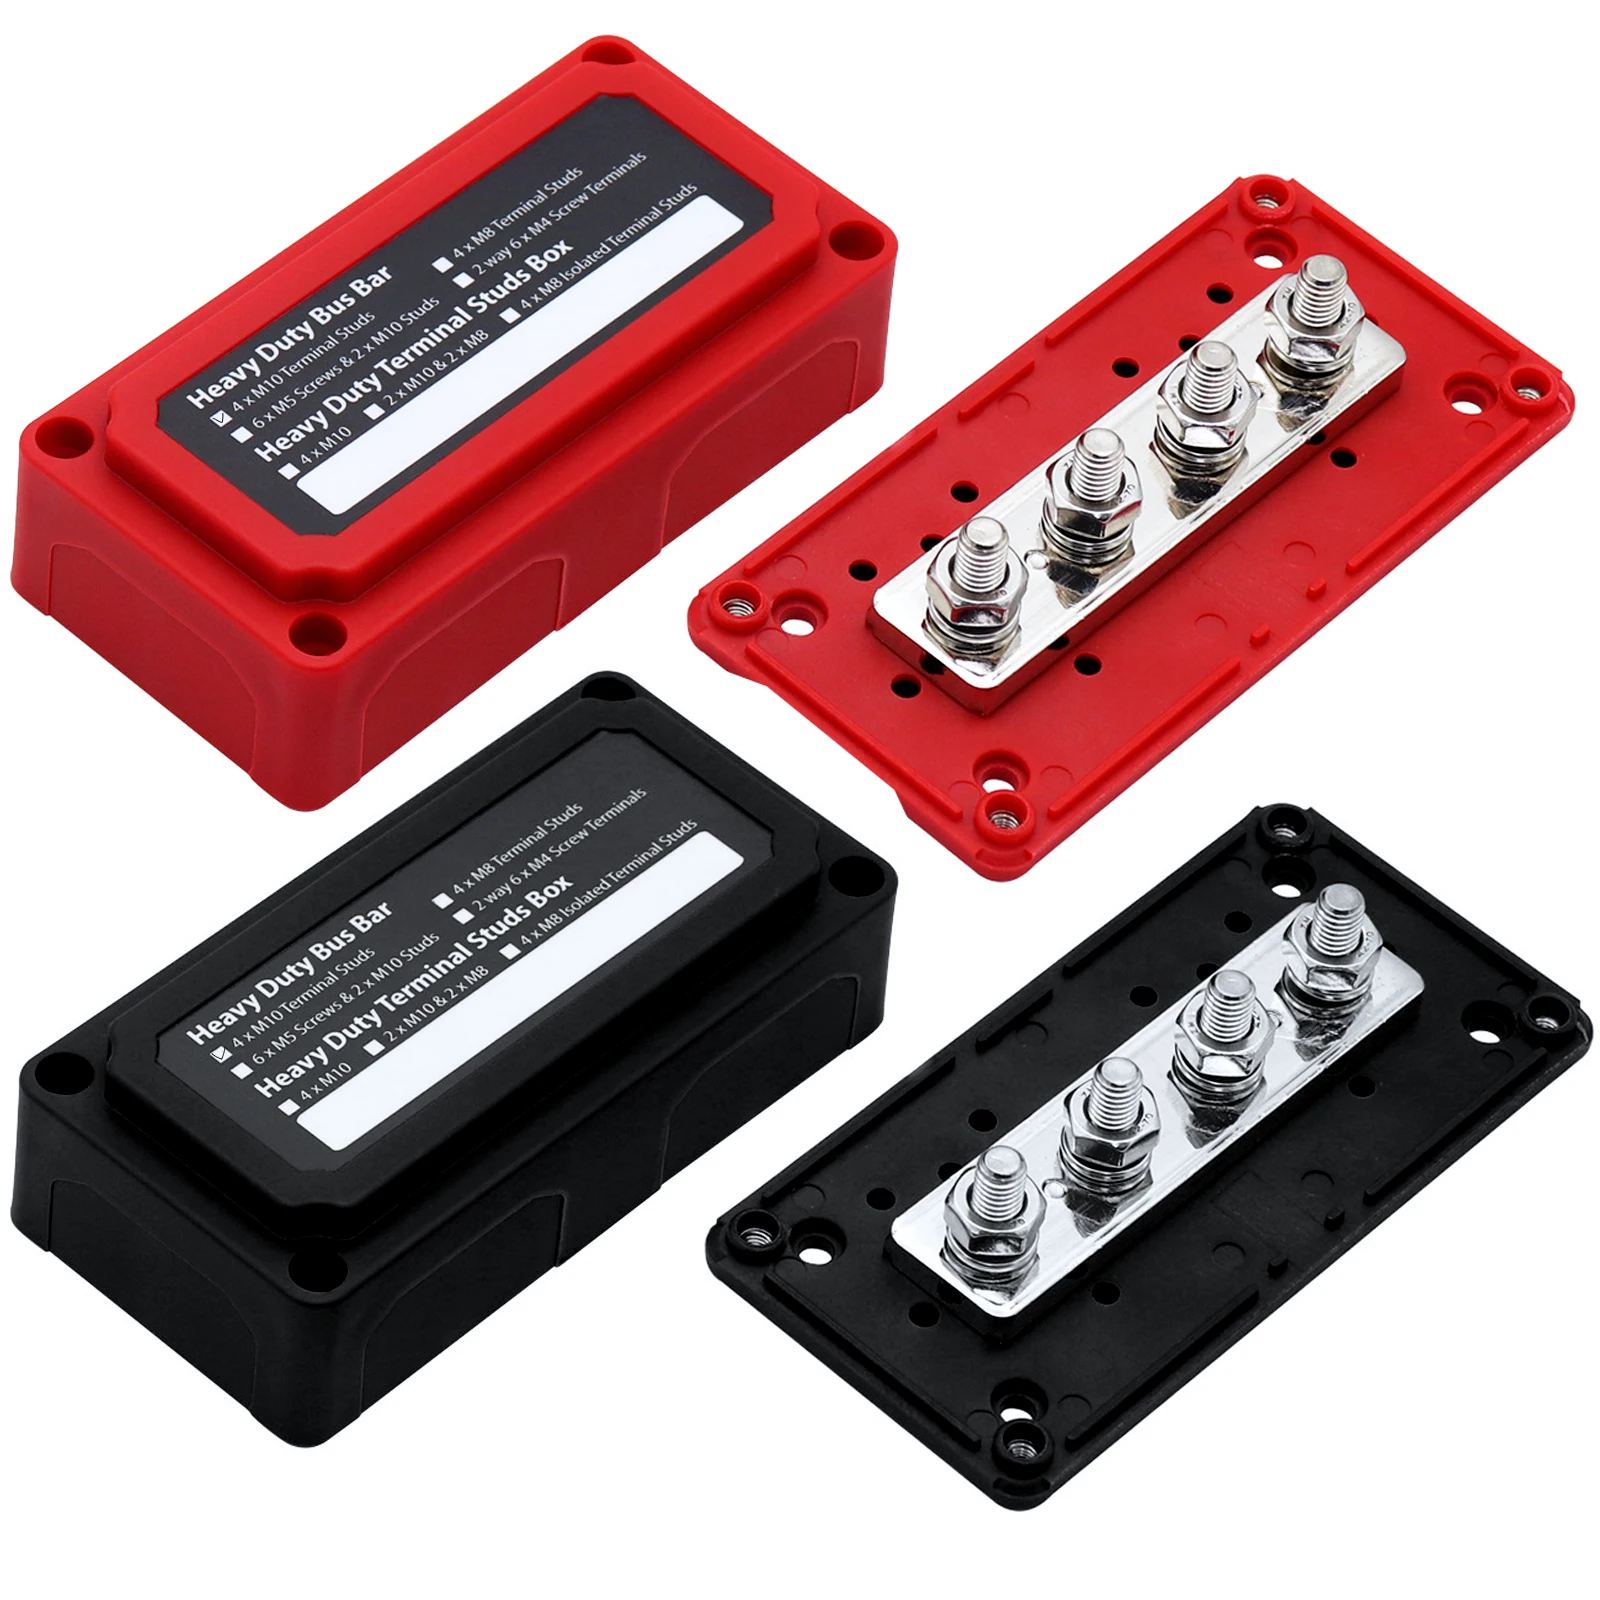 Heavy Duty Bus Bar Box M8 300A with 4 Terminal Studs Power Distribution Box  Block Boating Fishing Battery Switches Busbars 12v-24v Max 48V (Red)